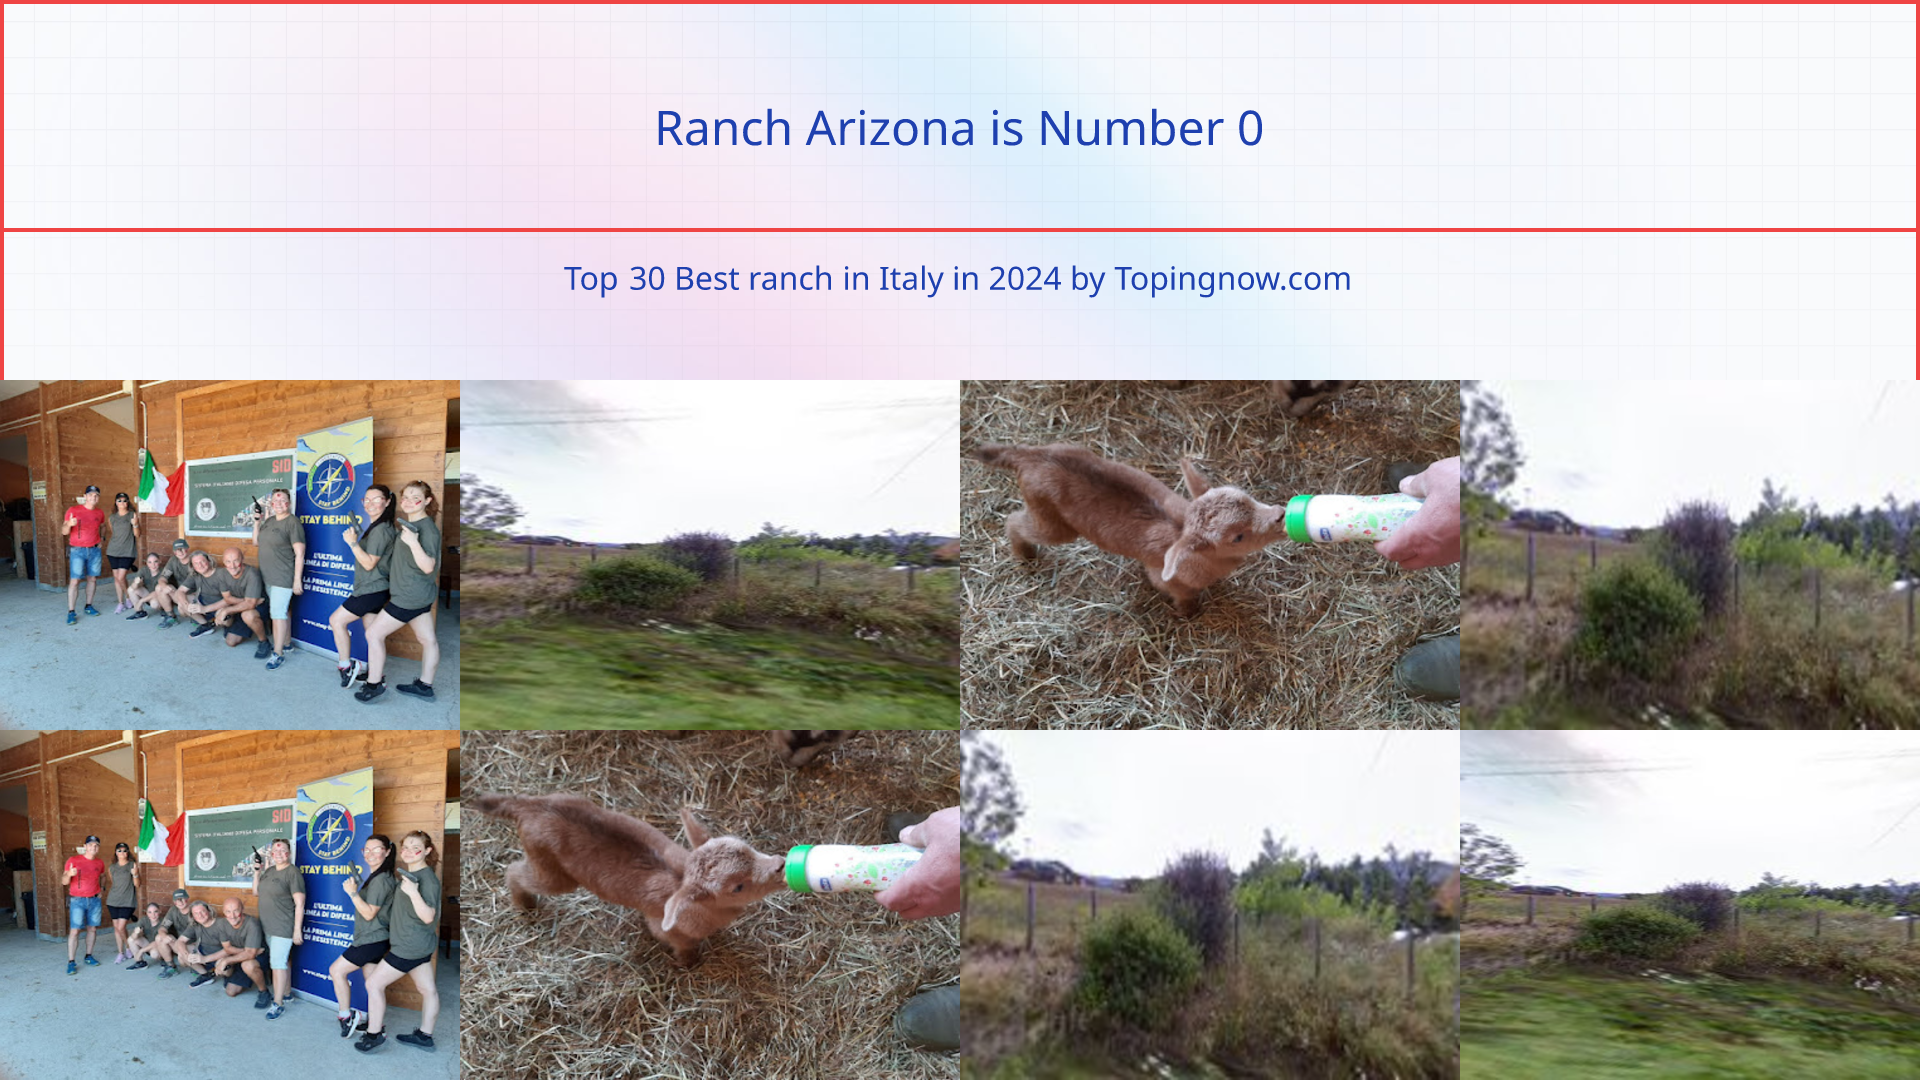 Ranch Arizona: Top 30 Best ranch in Italy in 2024